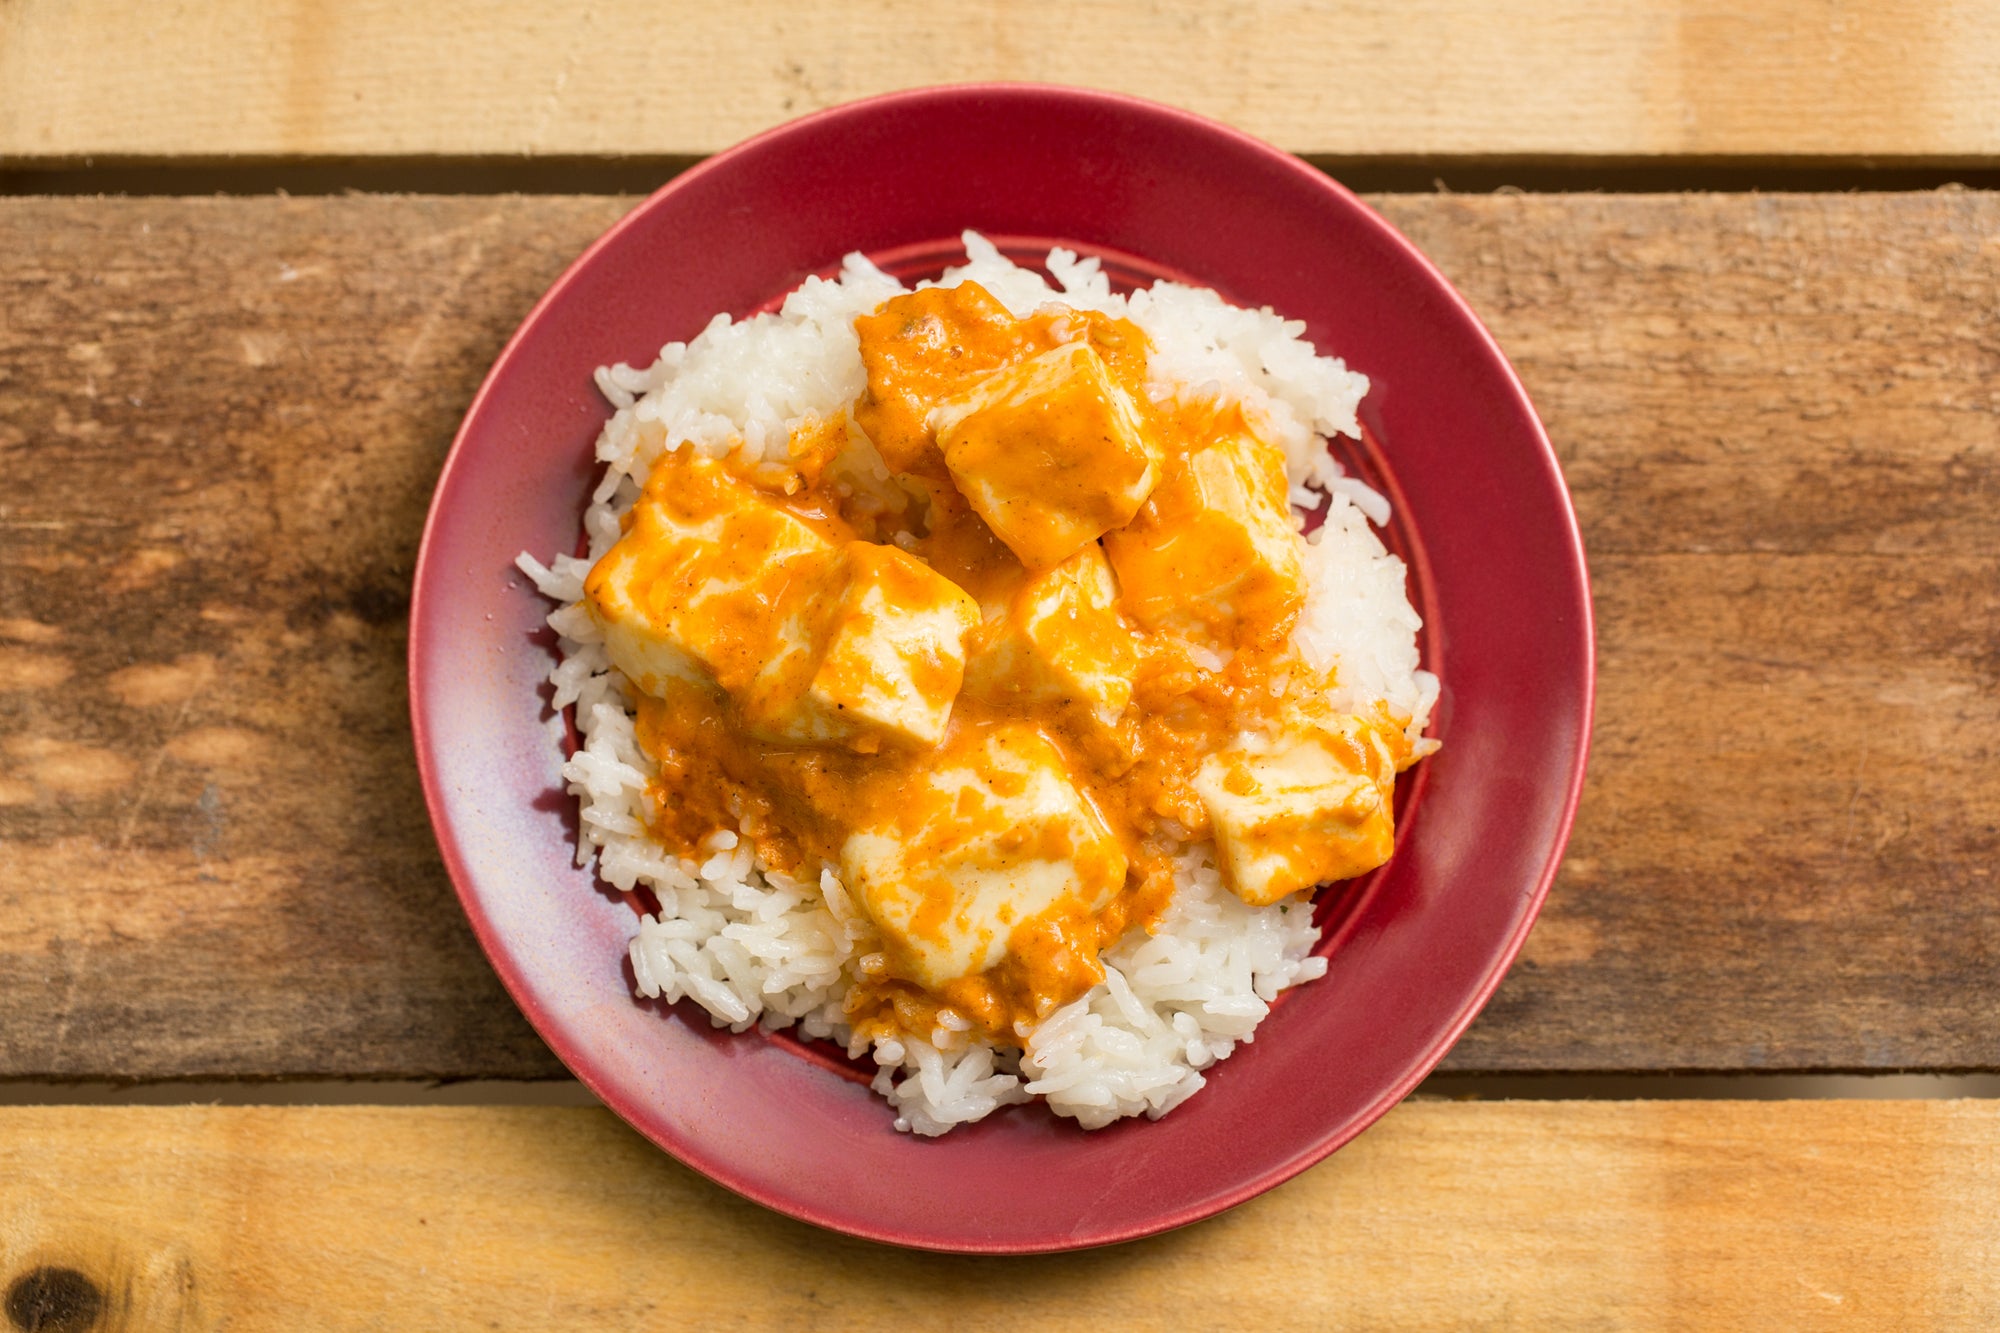 Paneer Tikka Masala on a bed of white rice, on a red plate.